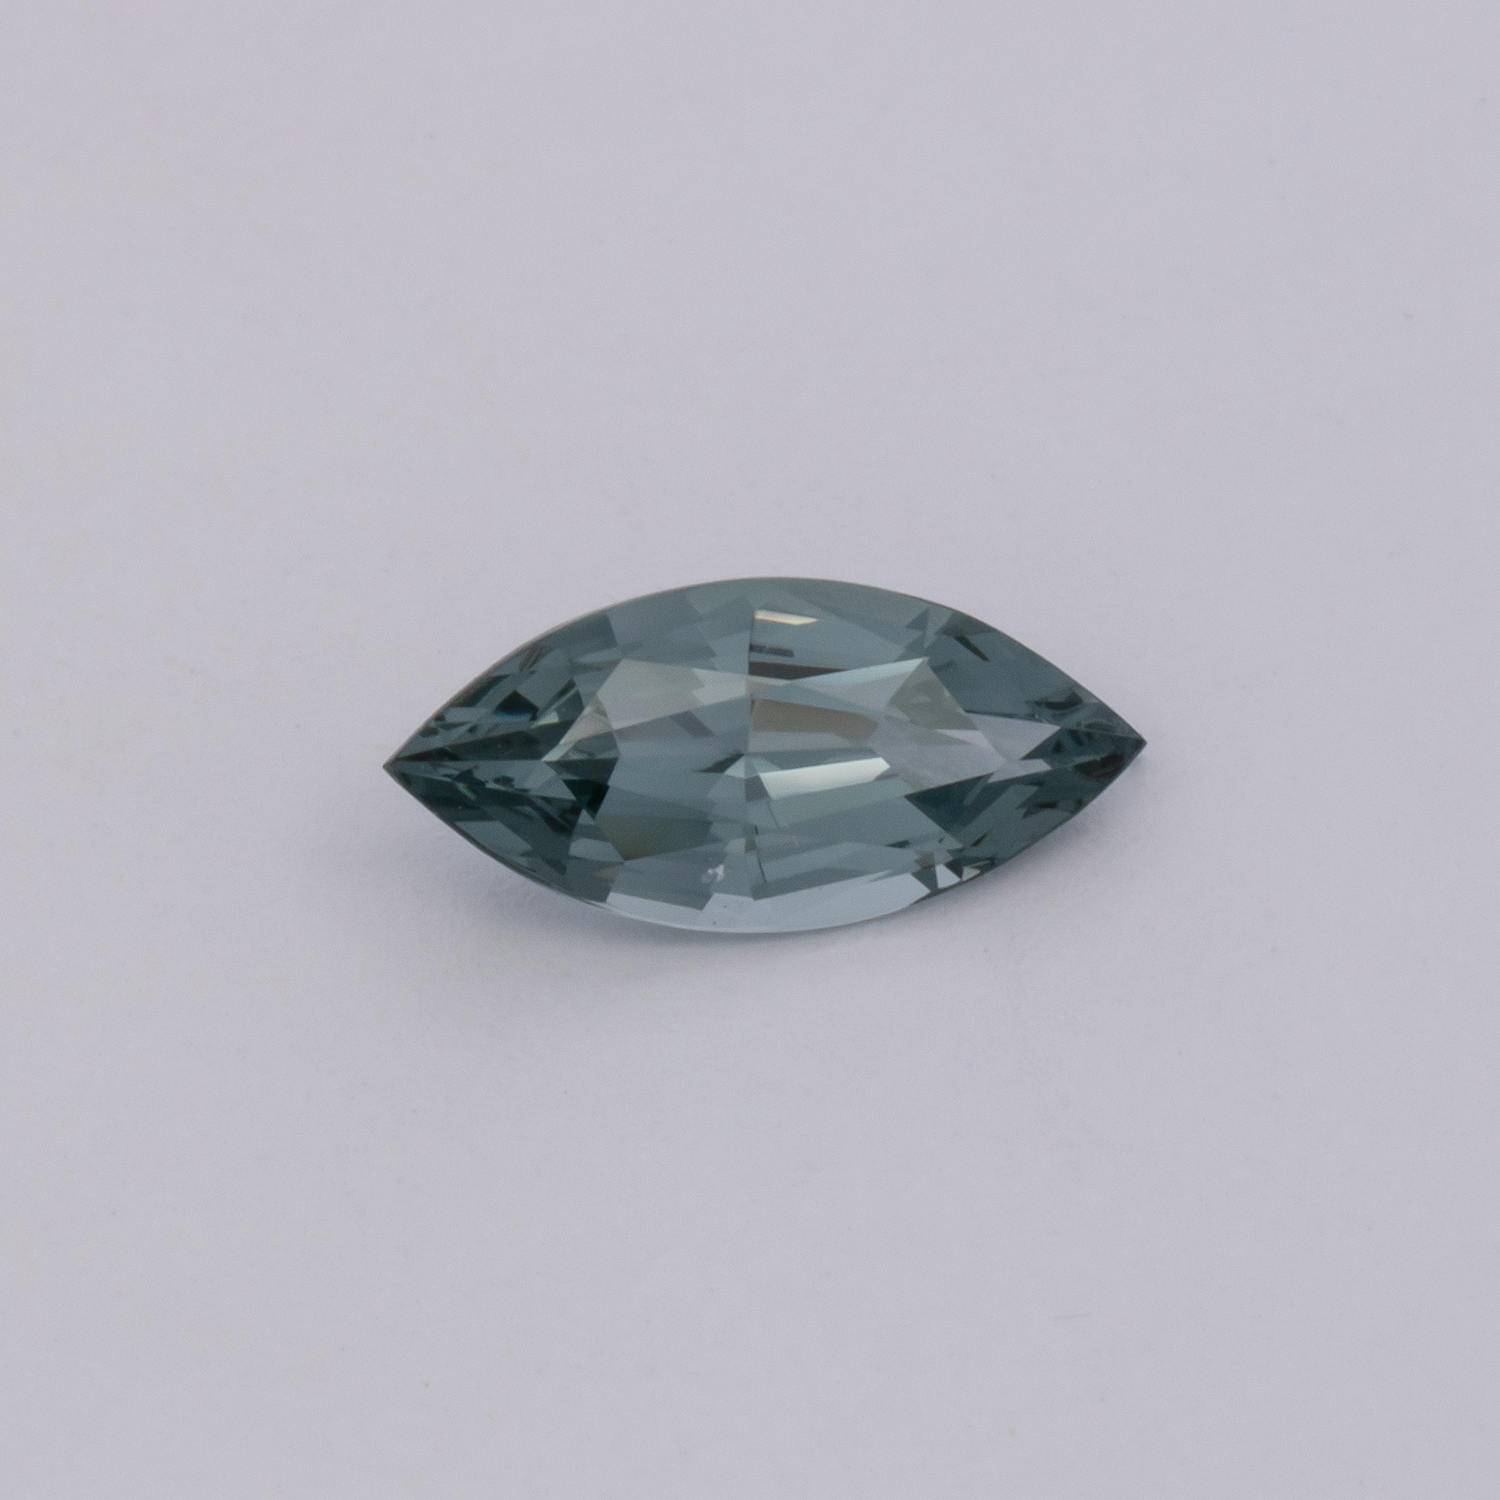 Spinell - grau, navette, 10x4.5 mm, 0.91 cts, Nr. SP90090